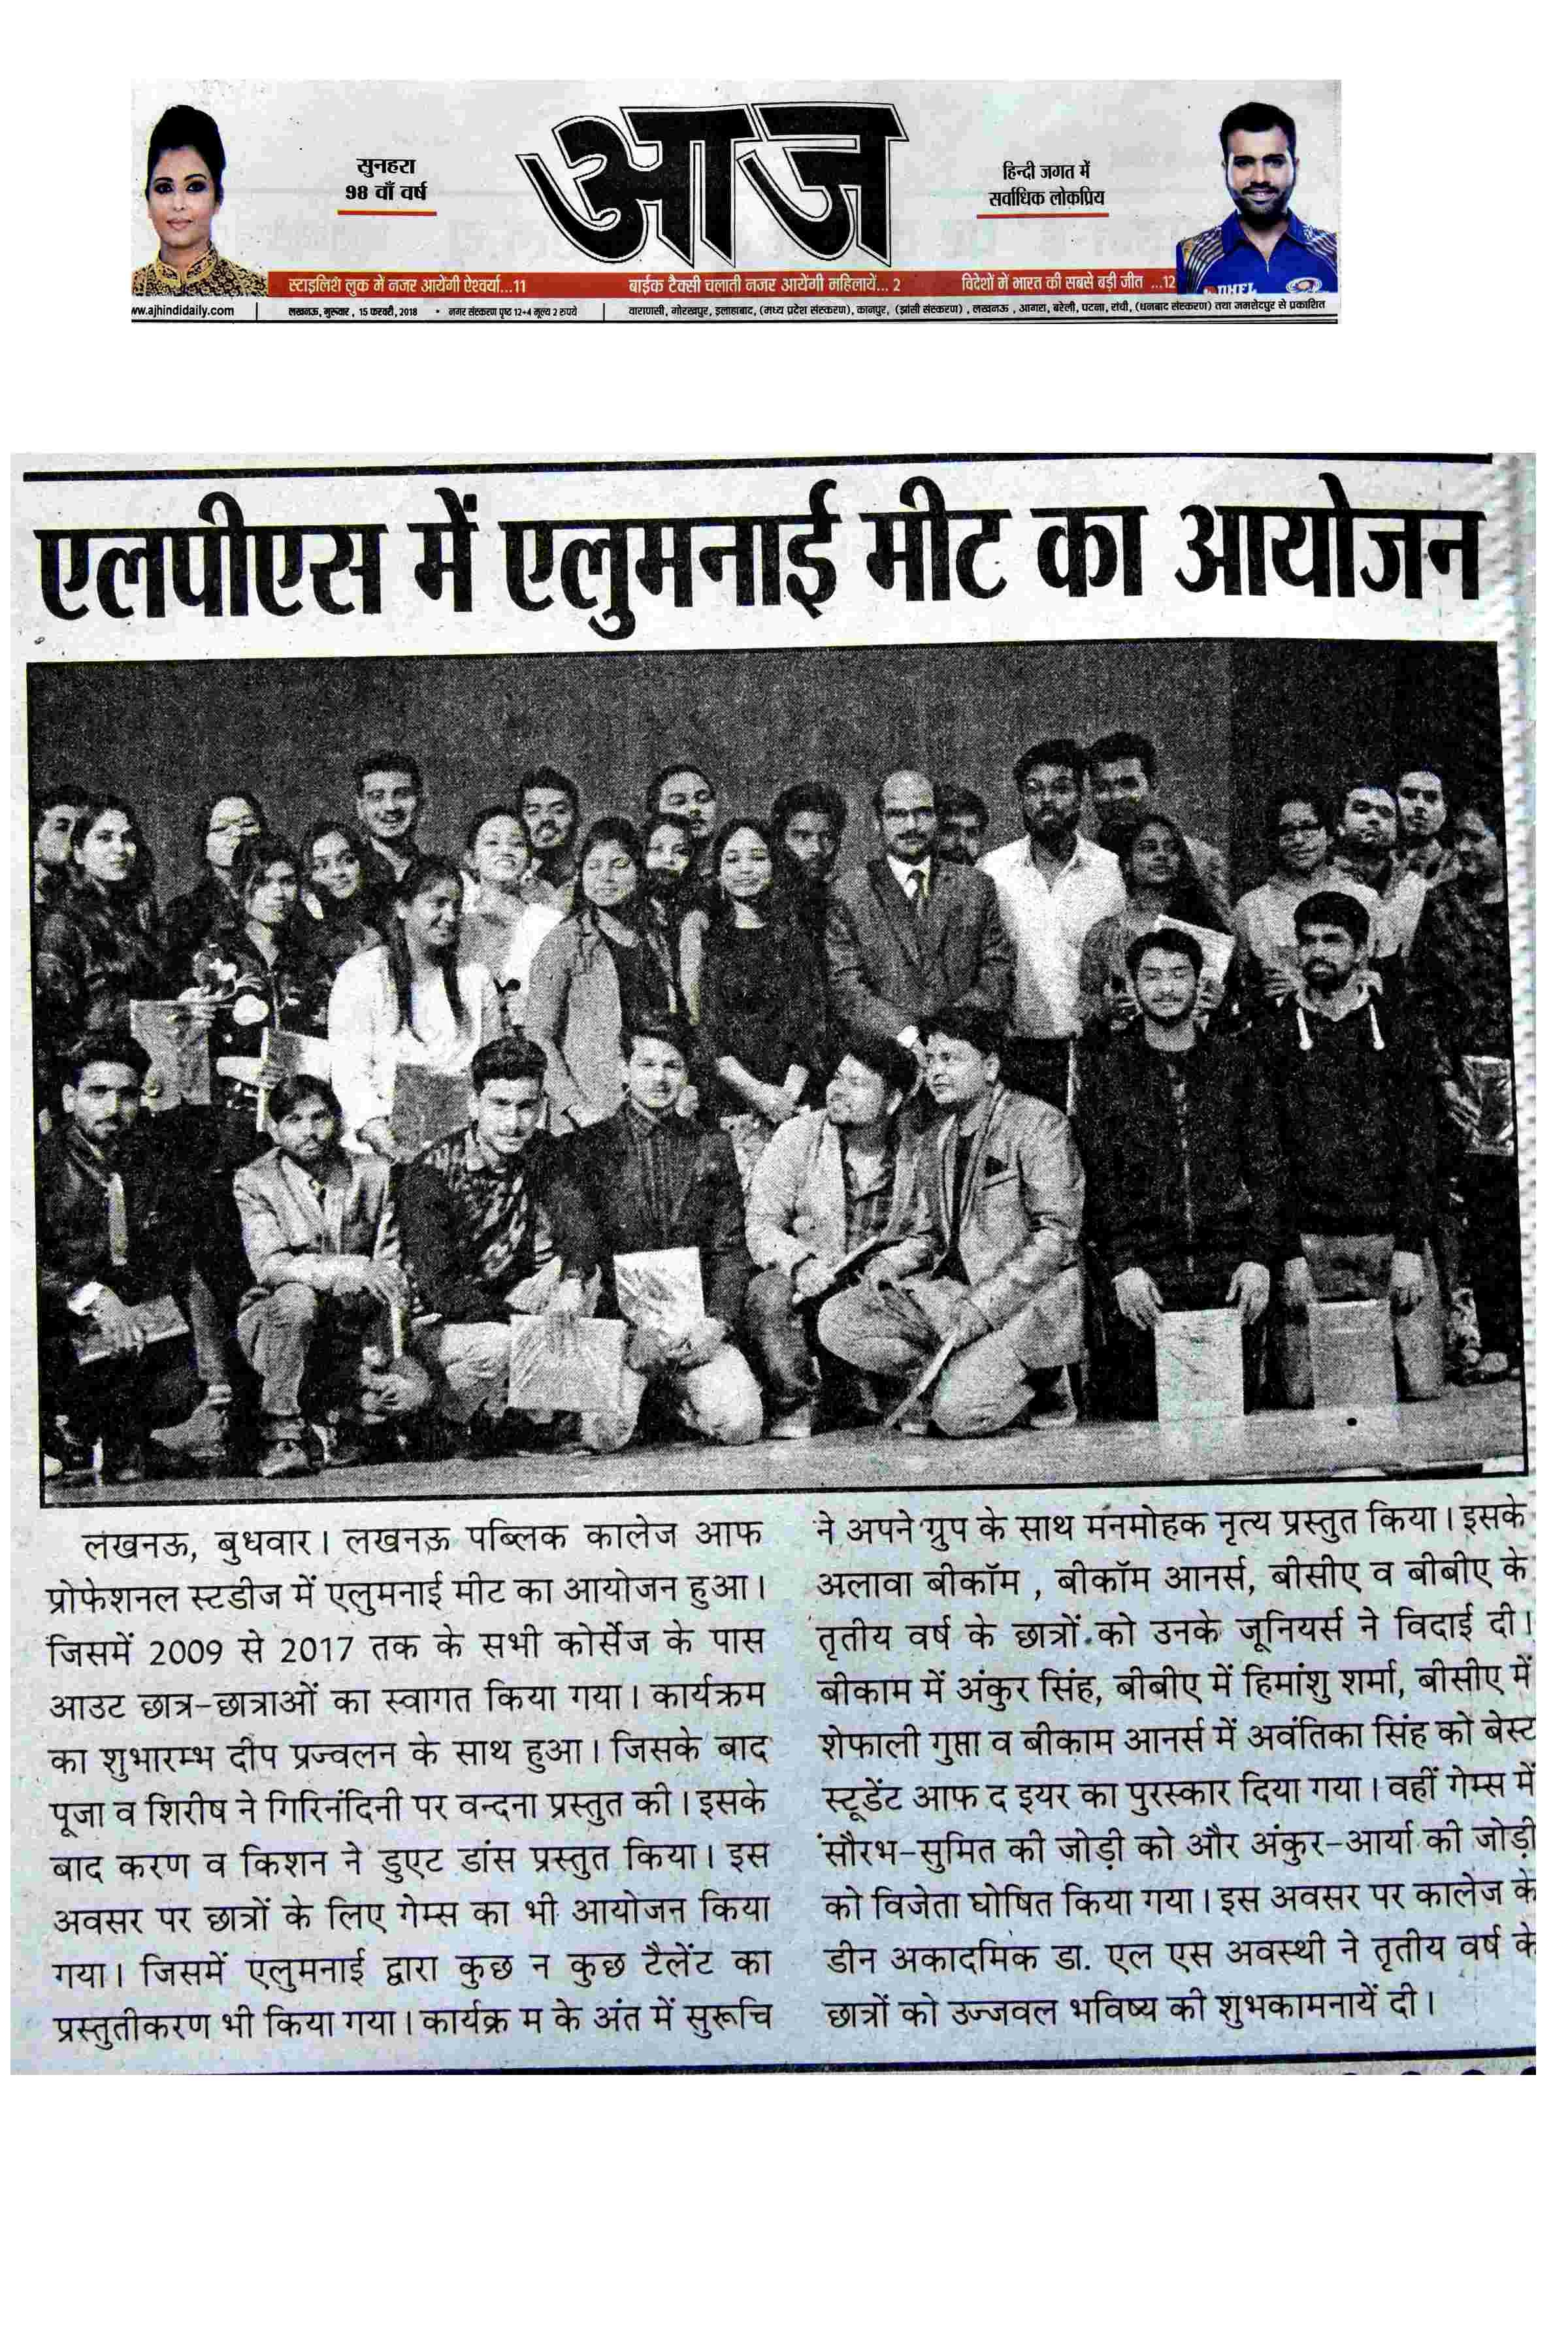 LPCPS ALUMNAI MEET 14th FEBRUARY 2018-AAJ PAGE 4